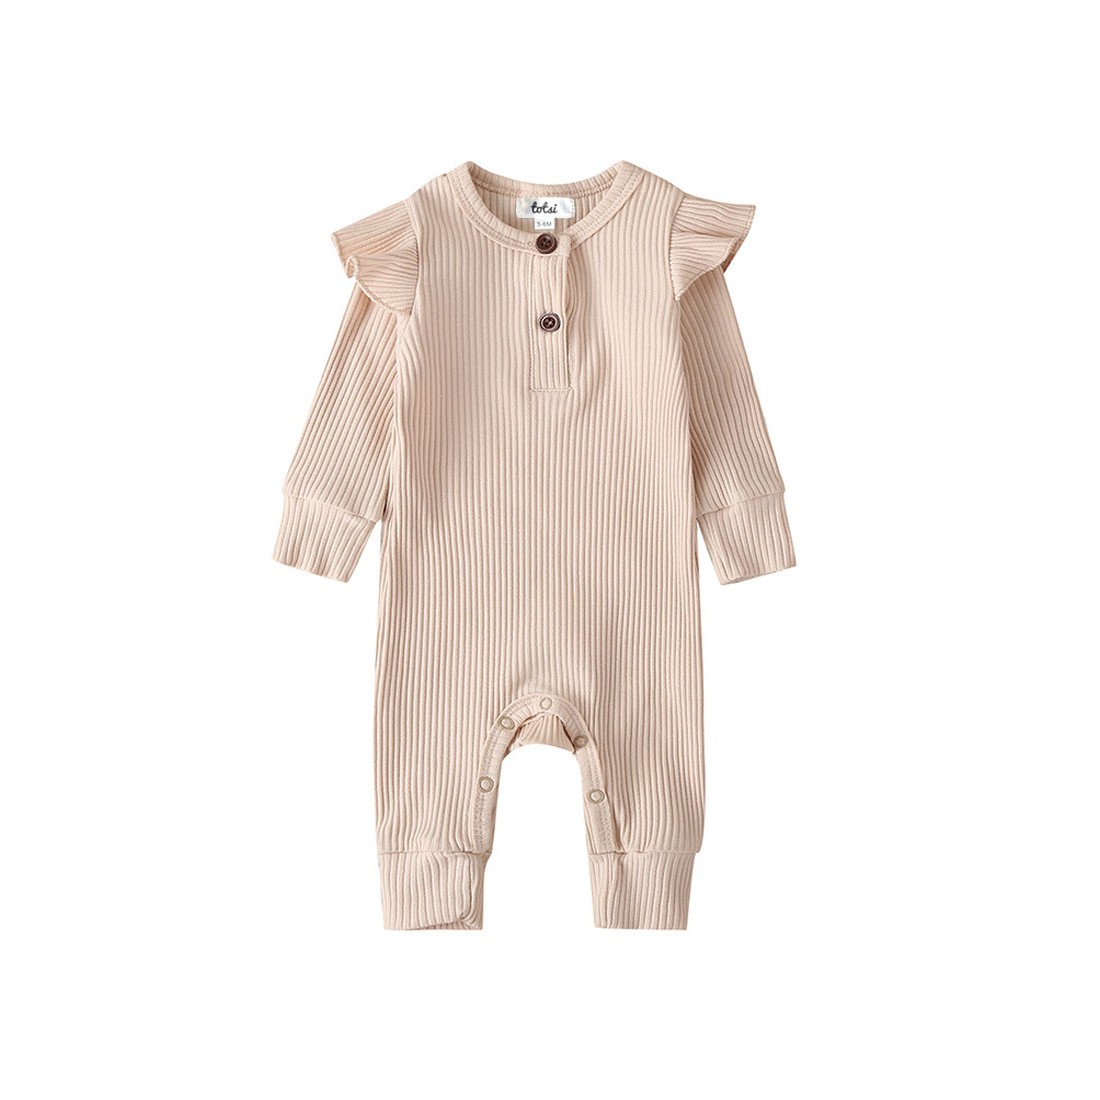 Gracie - Luxury Frilly Ribbed Ivory Baby Romper